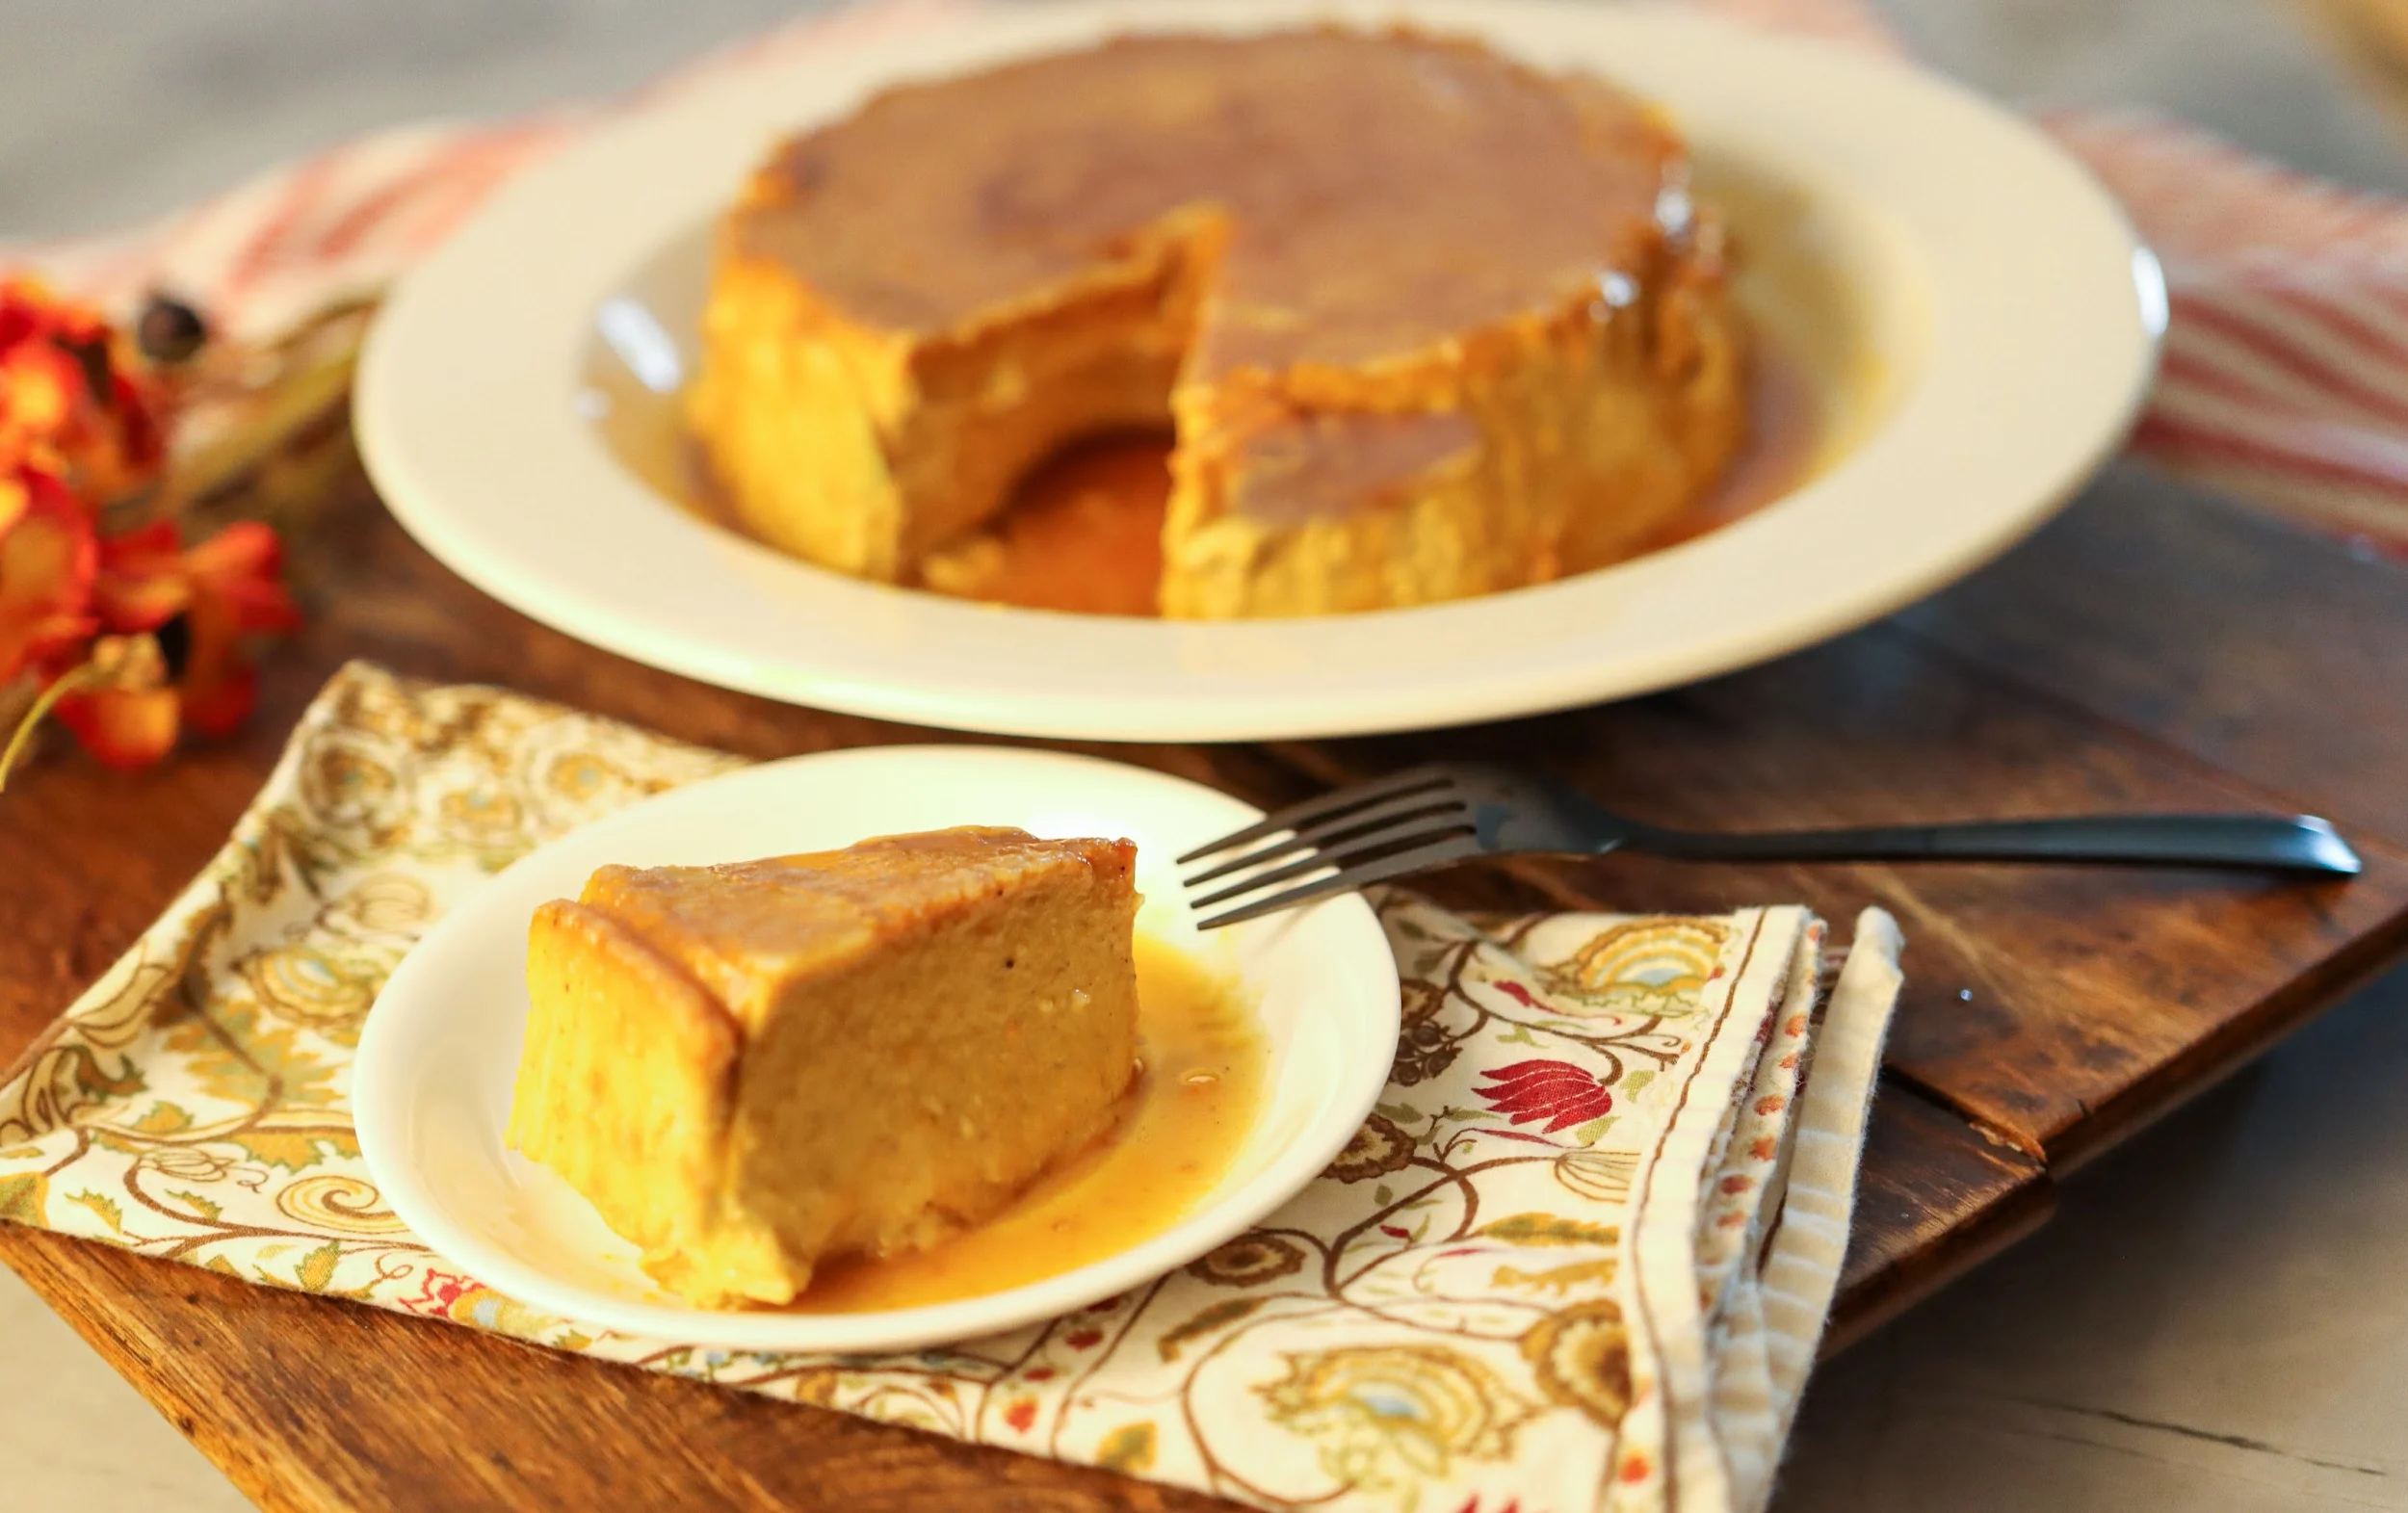 keto pumpkin flan sliced and ready to serve on a wood board with a fall napkin underneath